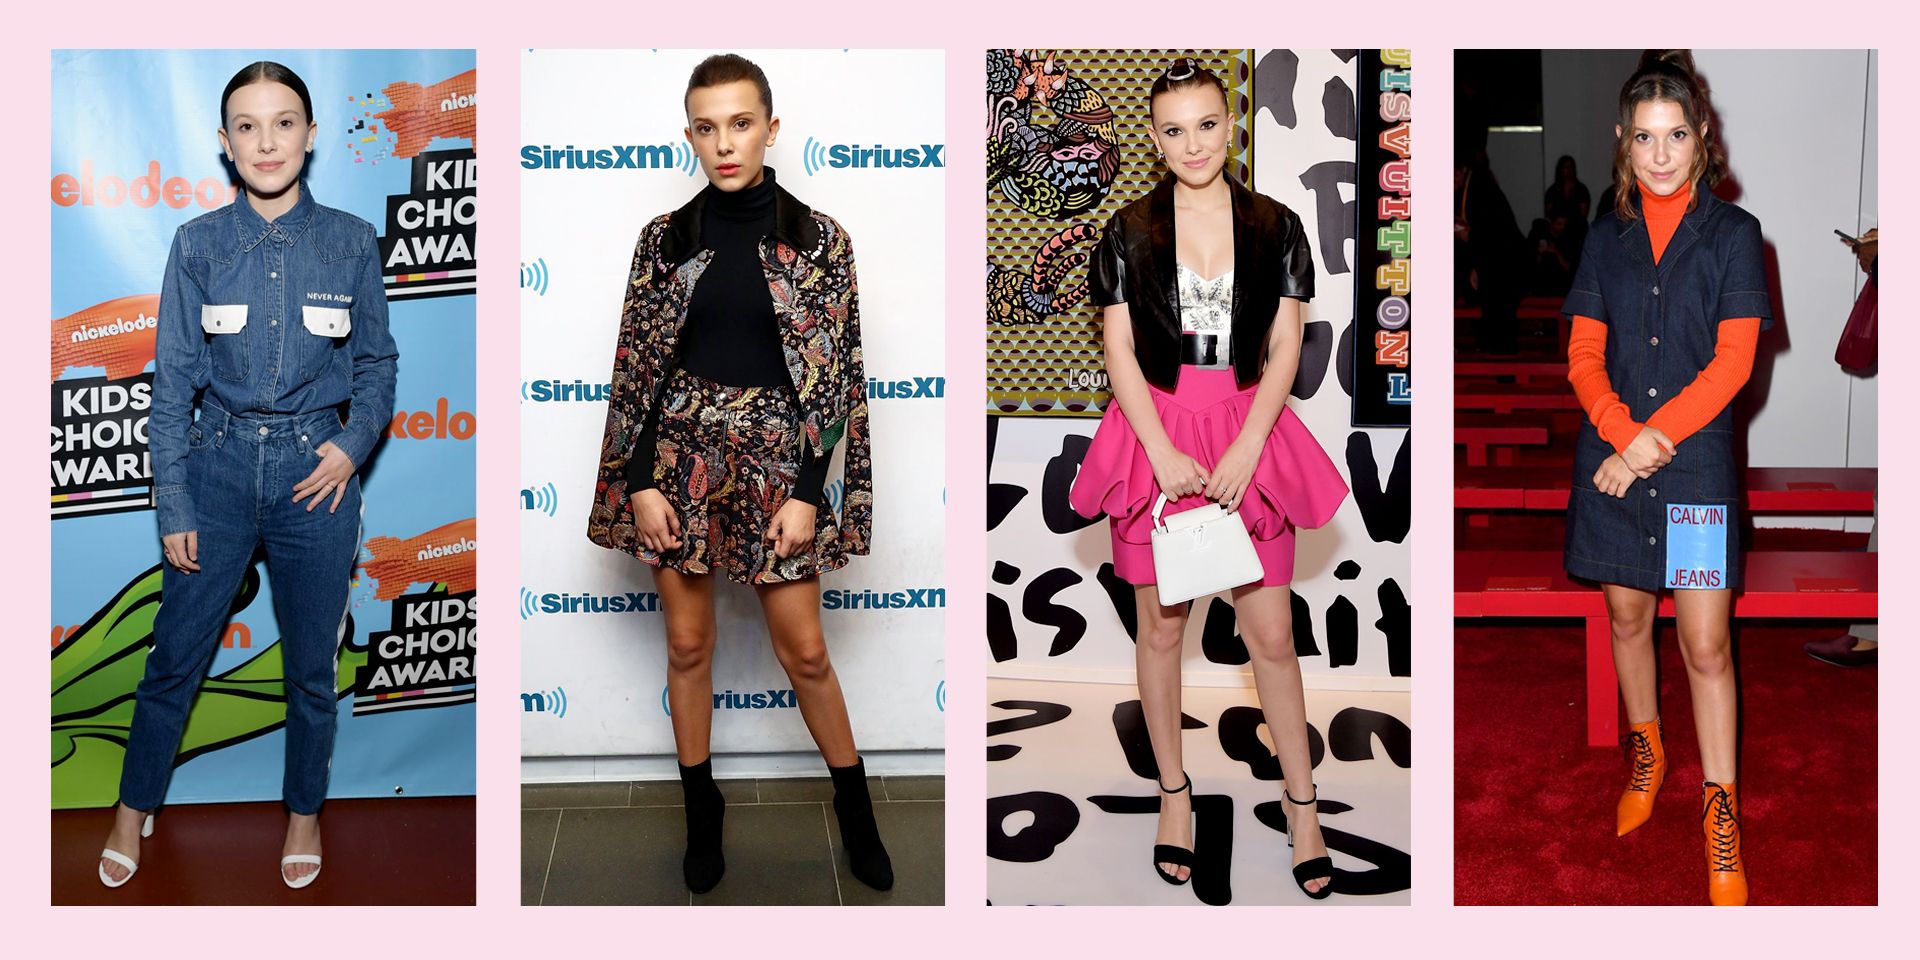 Millie Bobby Brown Clothes & Outfits